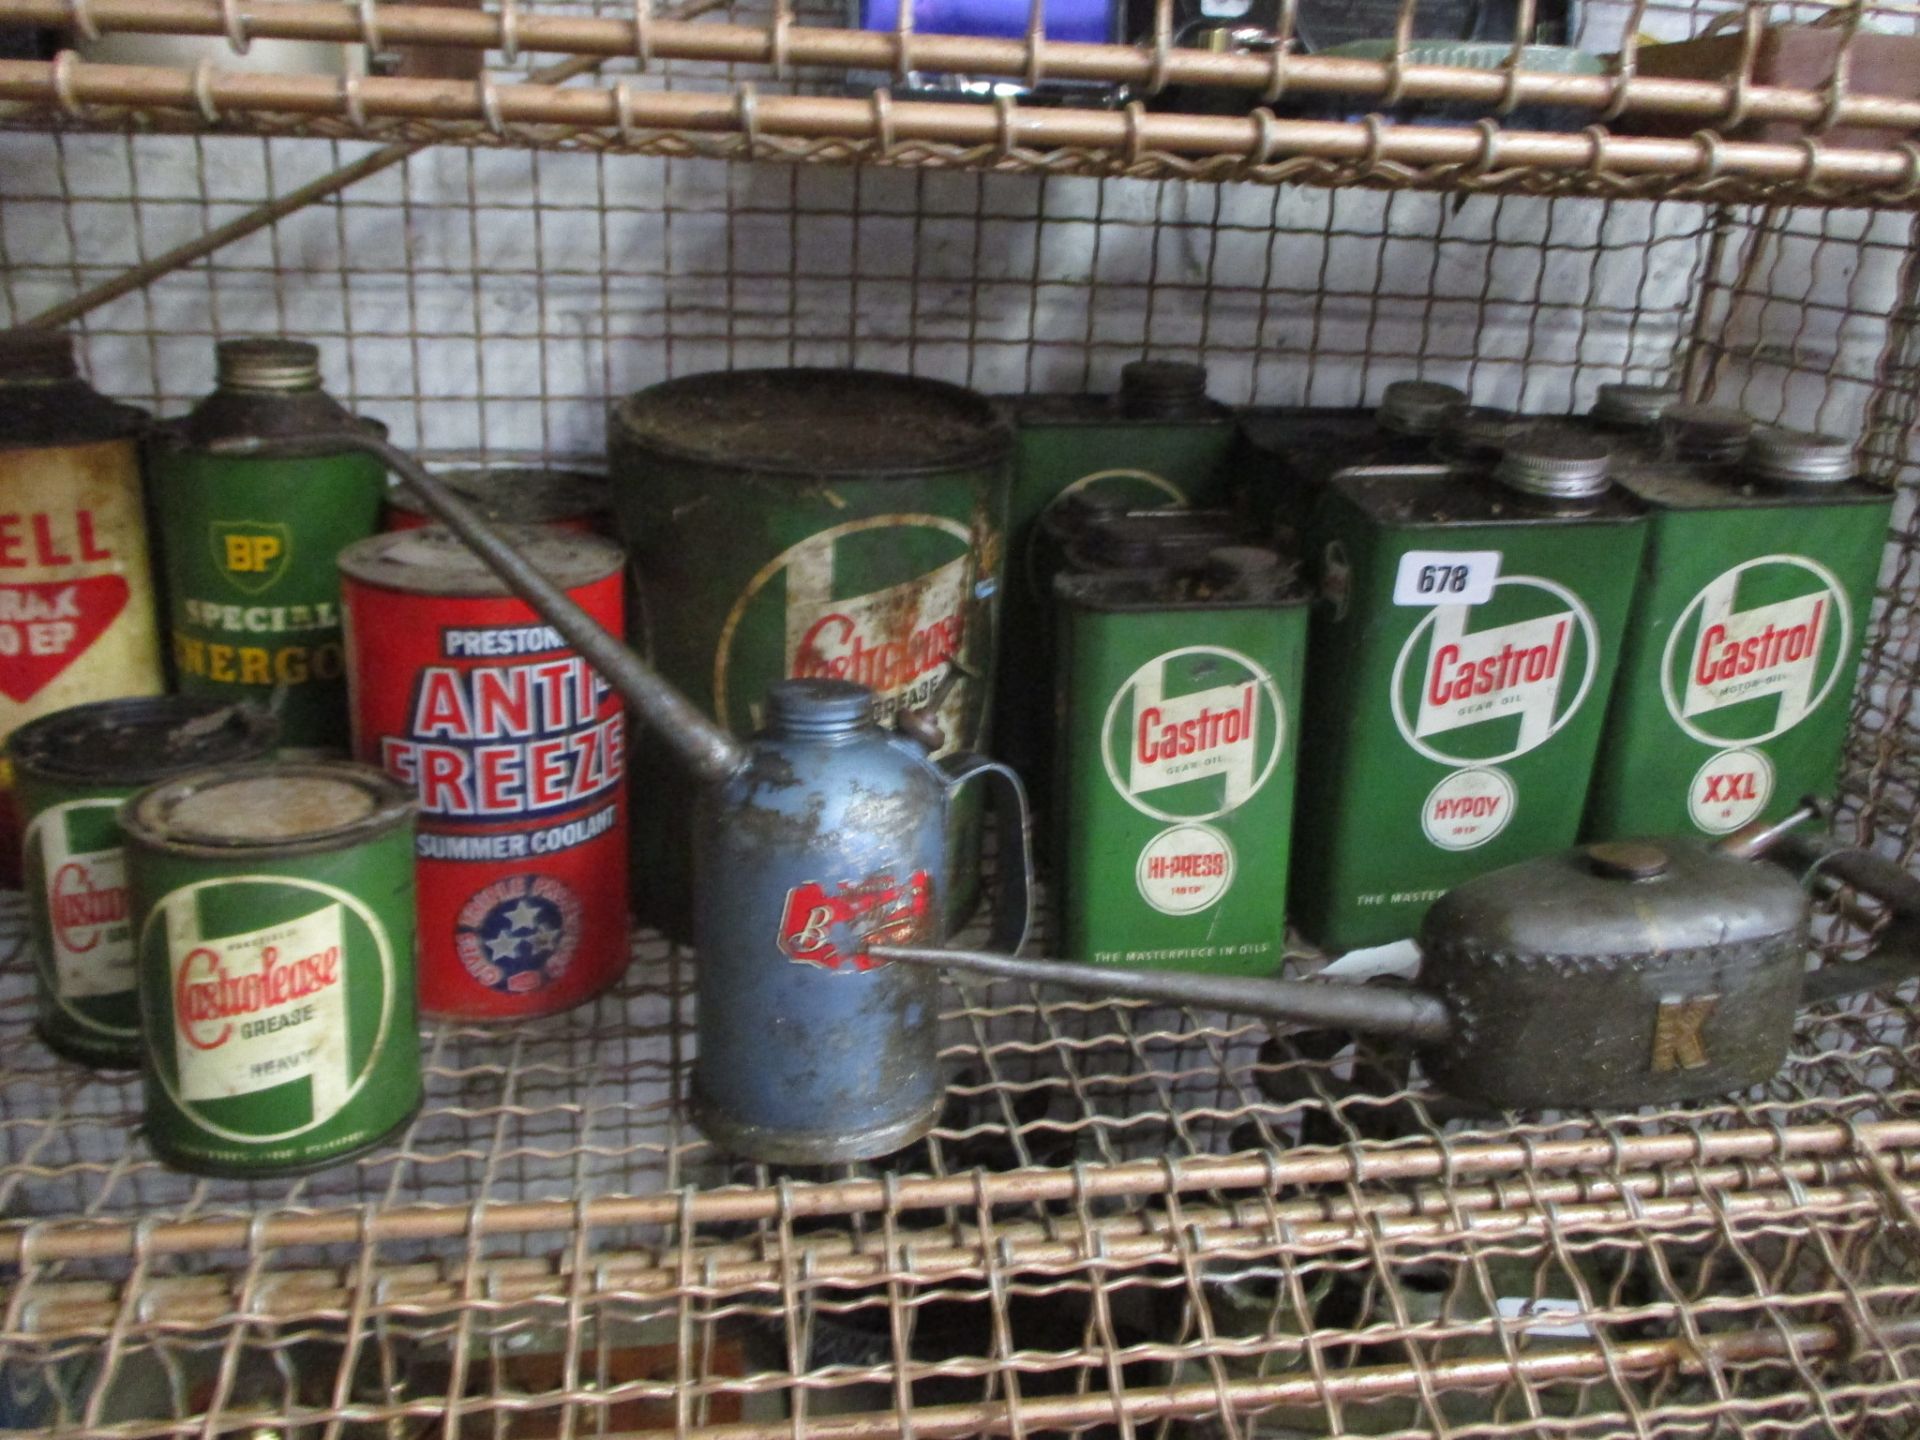 Half shelf of BP, Shell and Castrol oil cans with 2 other vintage oil cans